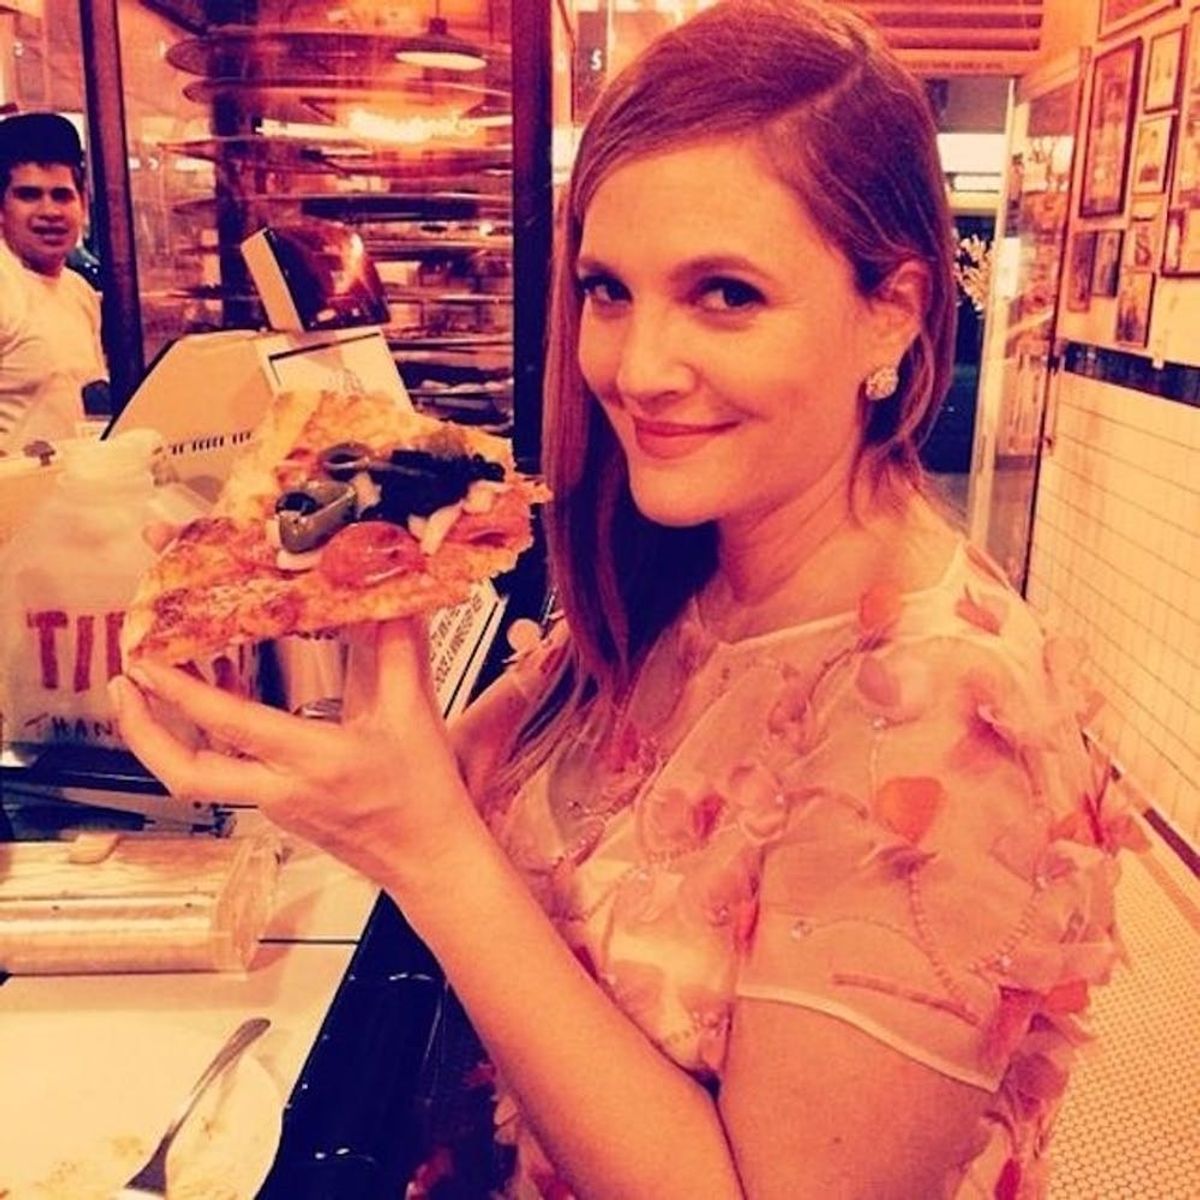 15 Photos of Our Favorite Celebs Chowing Down on Fast Food